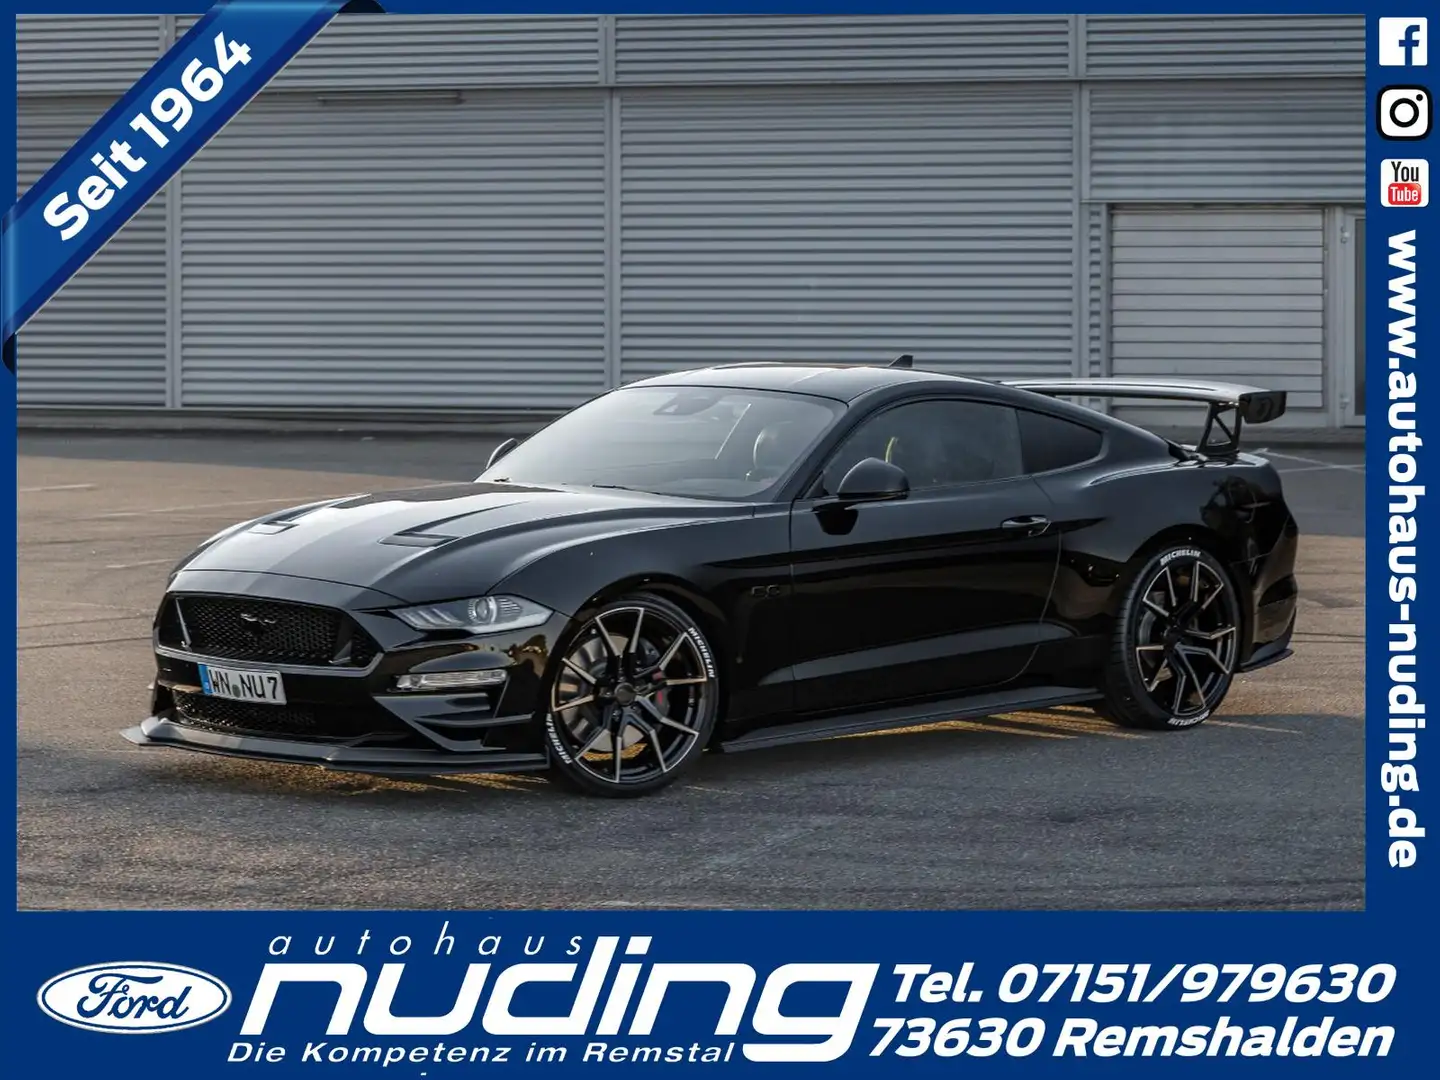 Ford Mustang GT 5.0 V8 Aut. Nuding Performance Umbau Czarny - 1